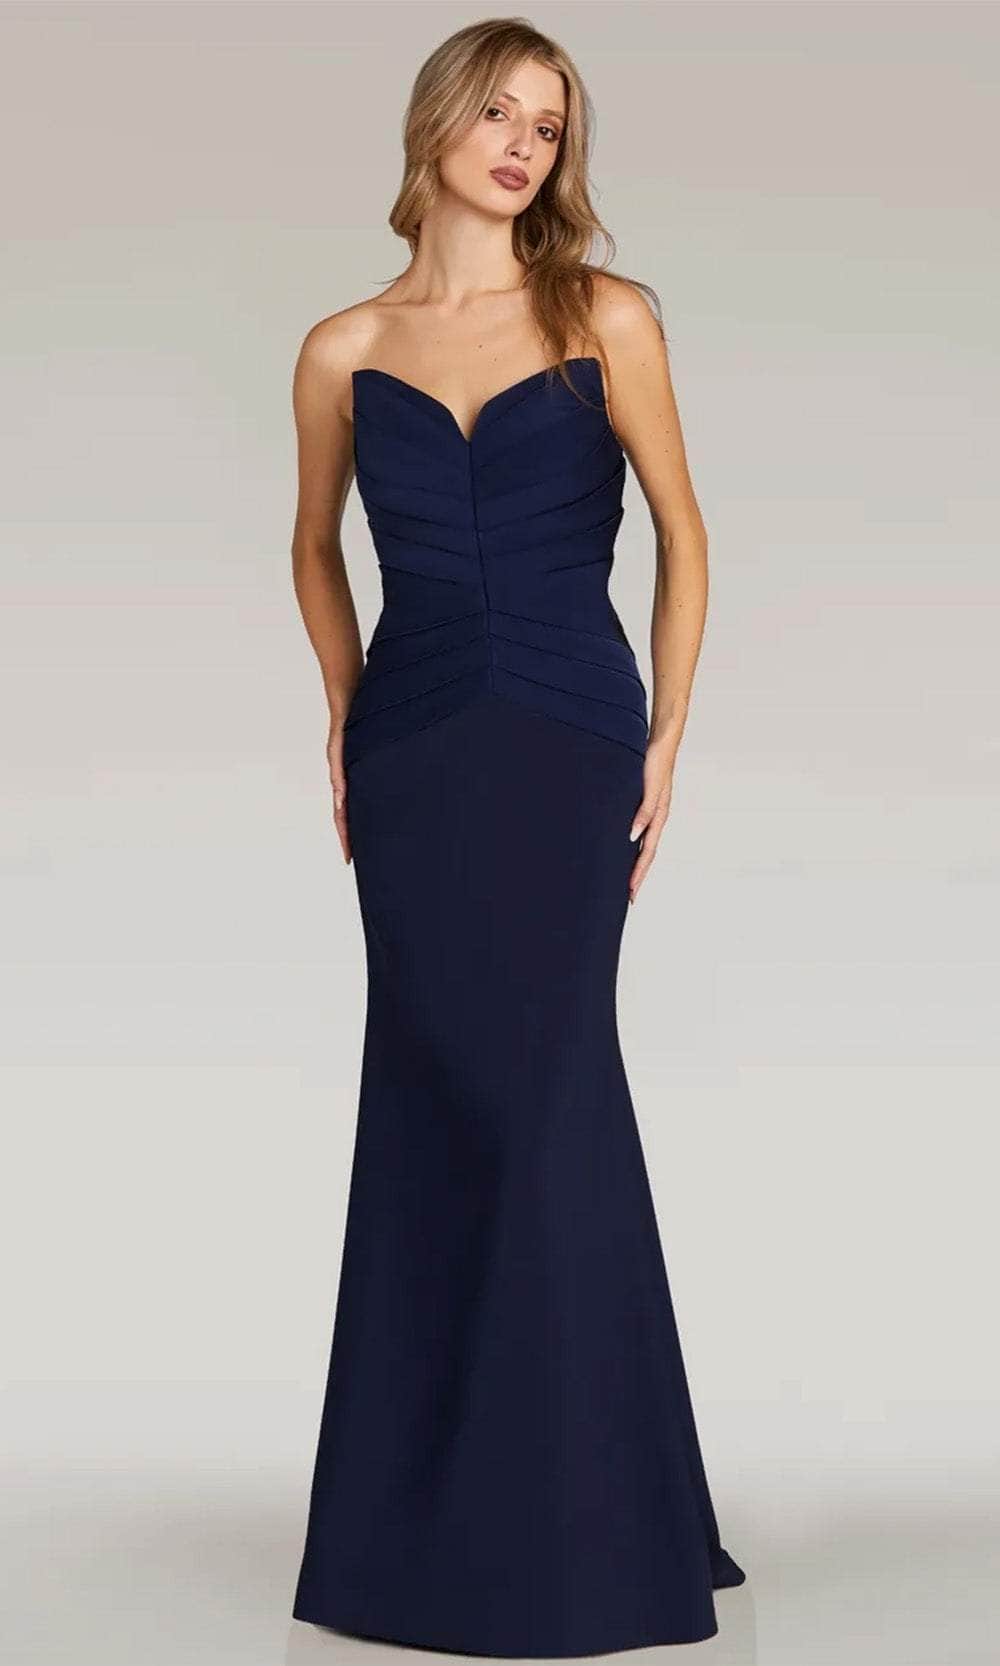 Gia Franco 12312 - Strapless Ruched Evening Dress Evening Dresses 2 / Navy